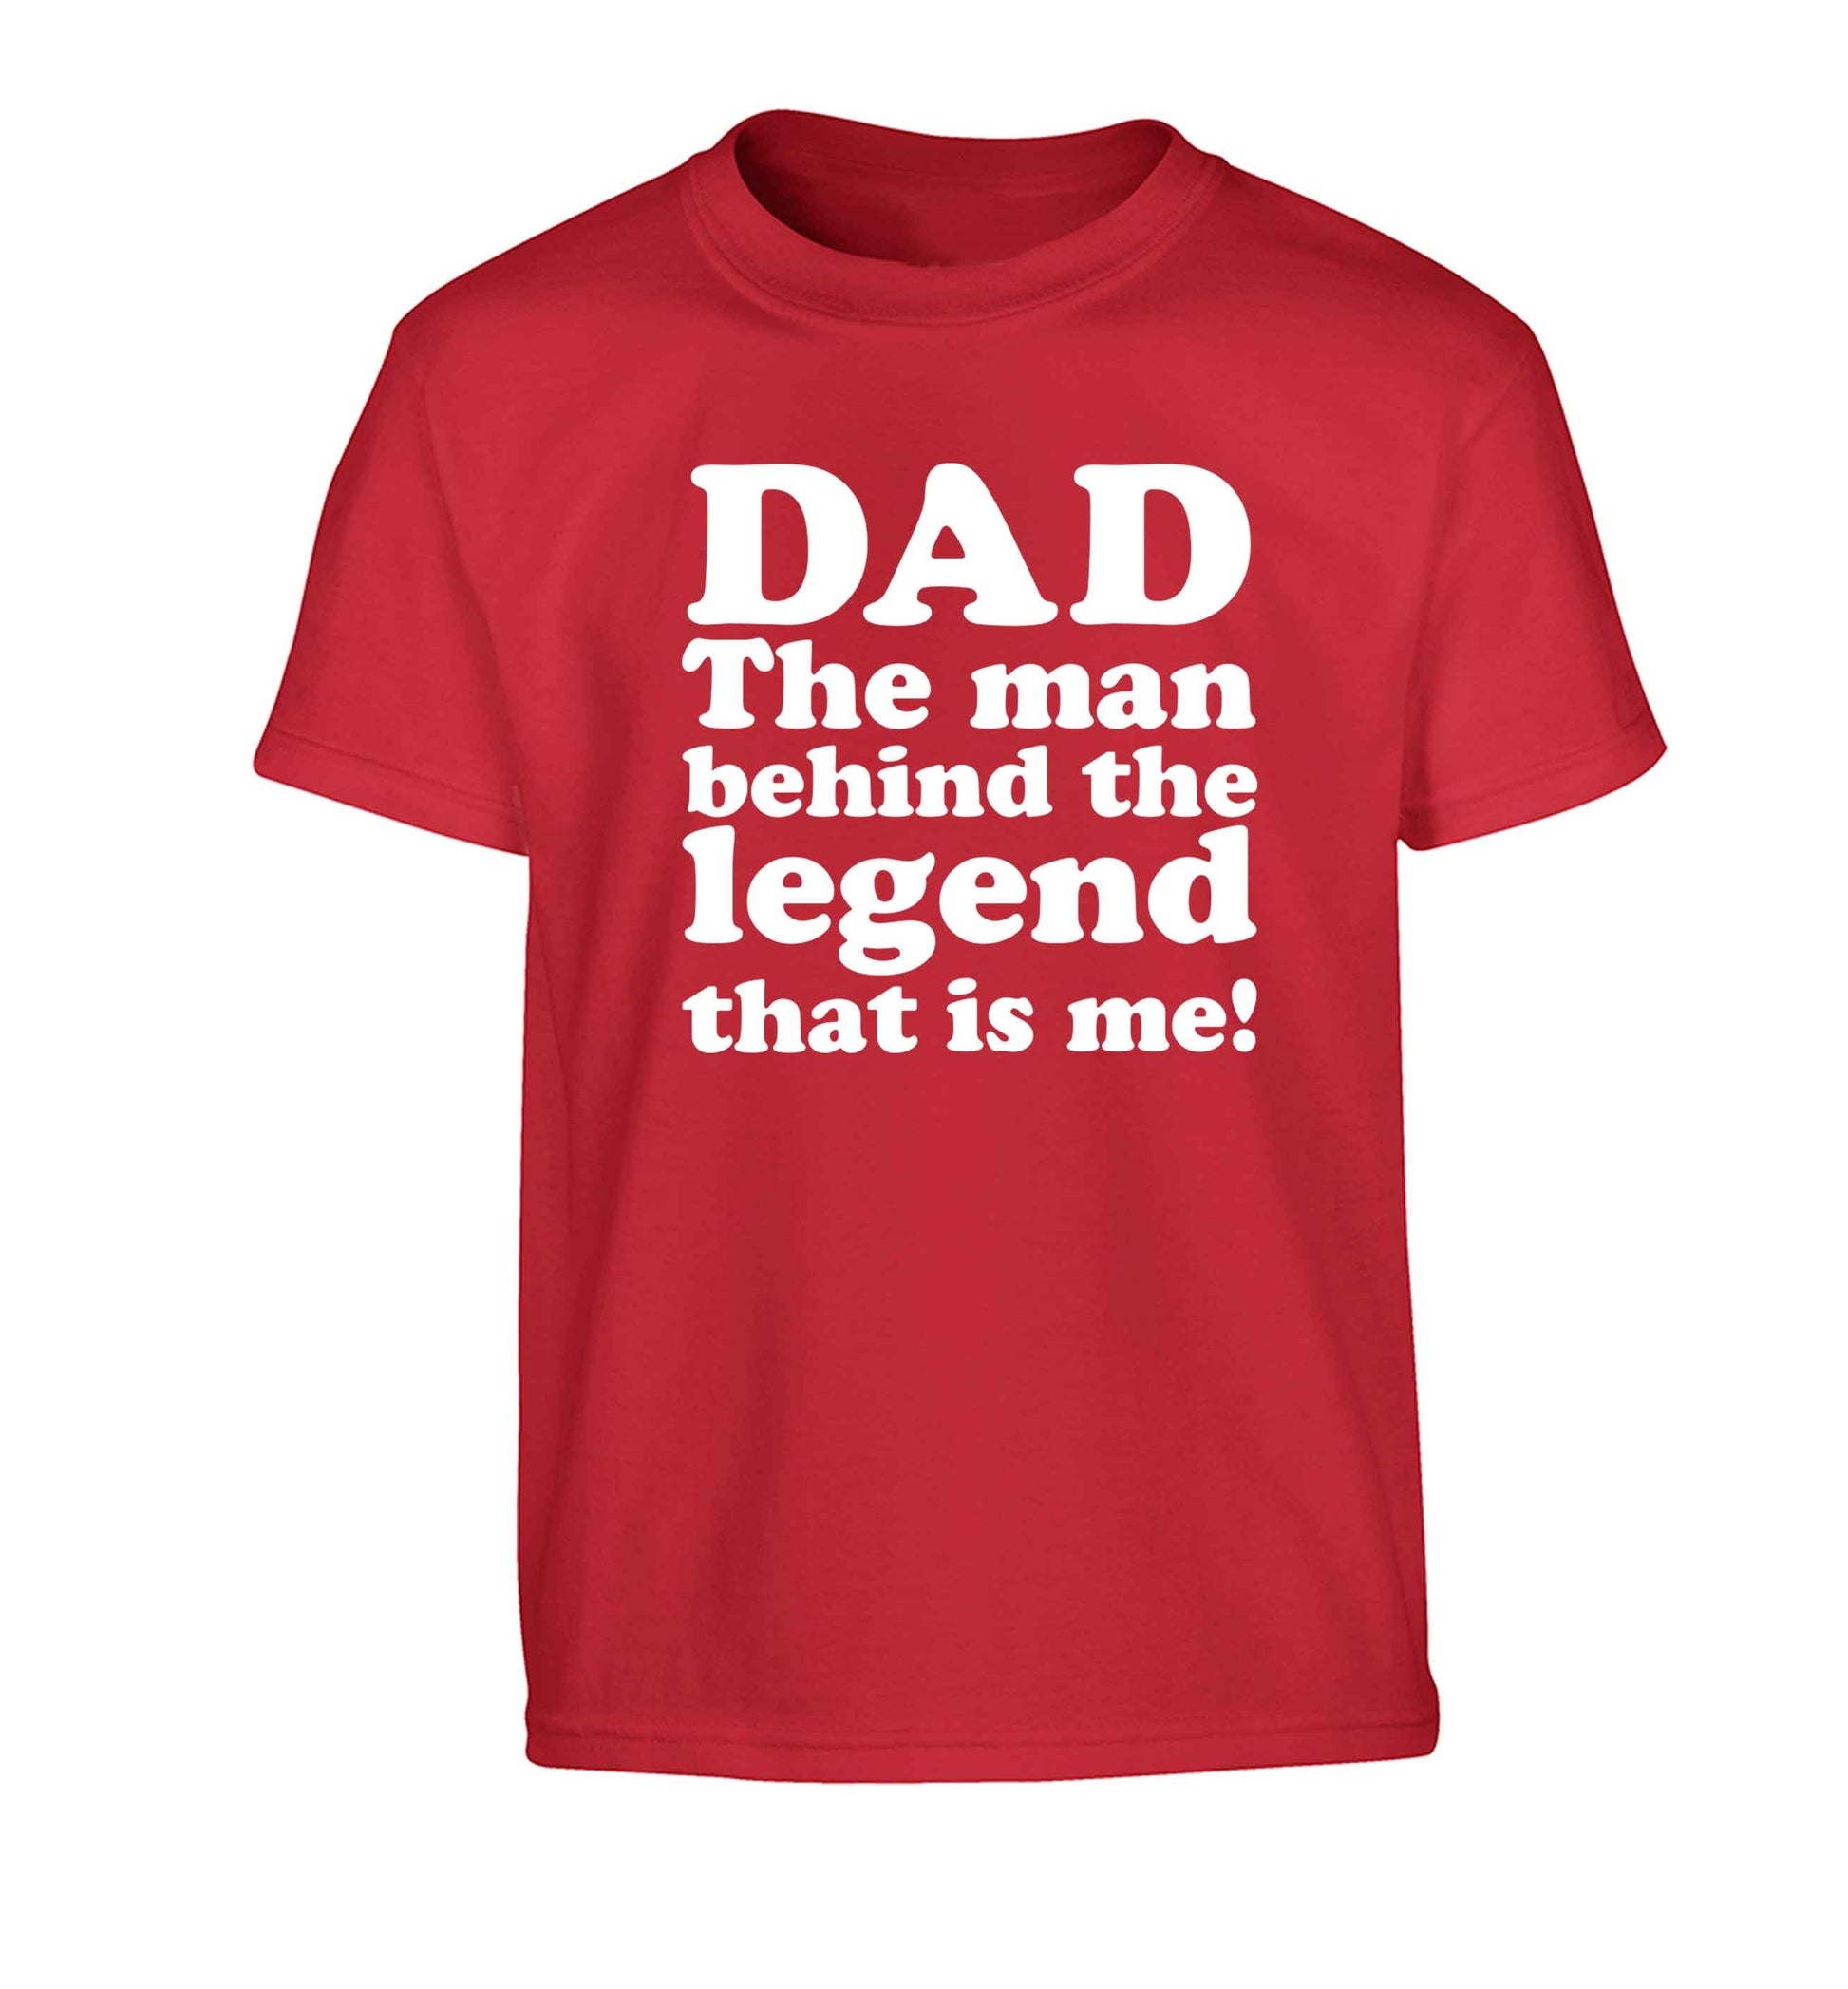 Dad the man behind the legend that is me Children's red Tshirt 12-13 Years